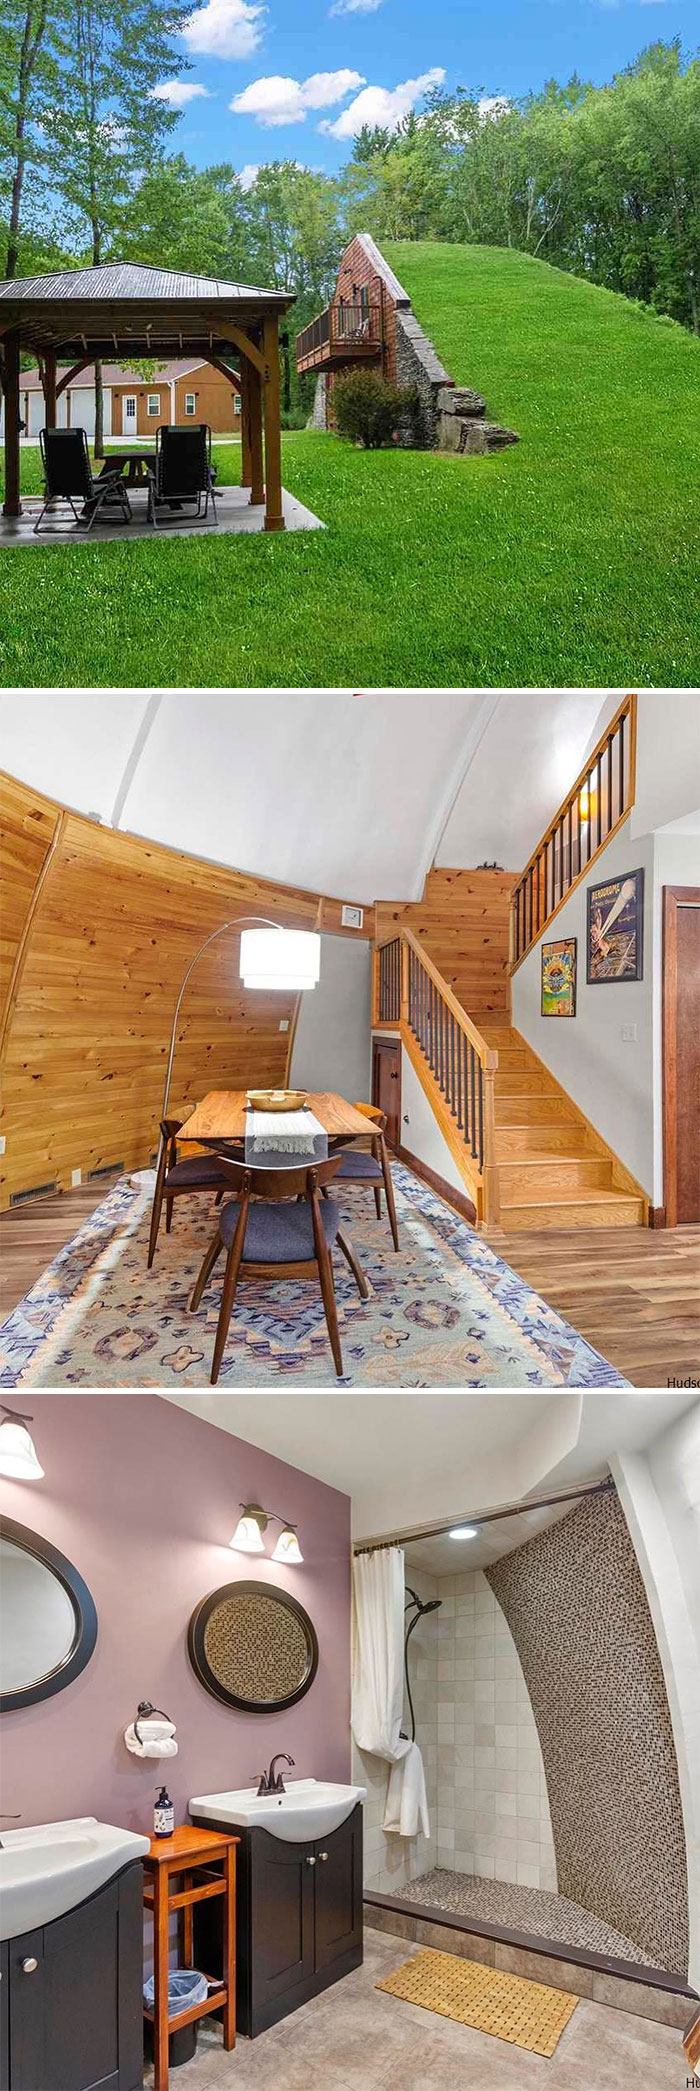 Here’s Another Really Cool Contemporary Hobbit Style Home In Saugerties, NY. Currently Listed For $549,000. 3 Bd, 2 Ba. 1,666 Sq Ft. 5.9 Acres